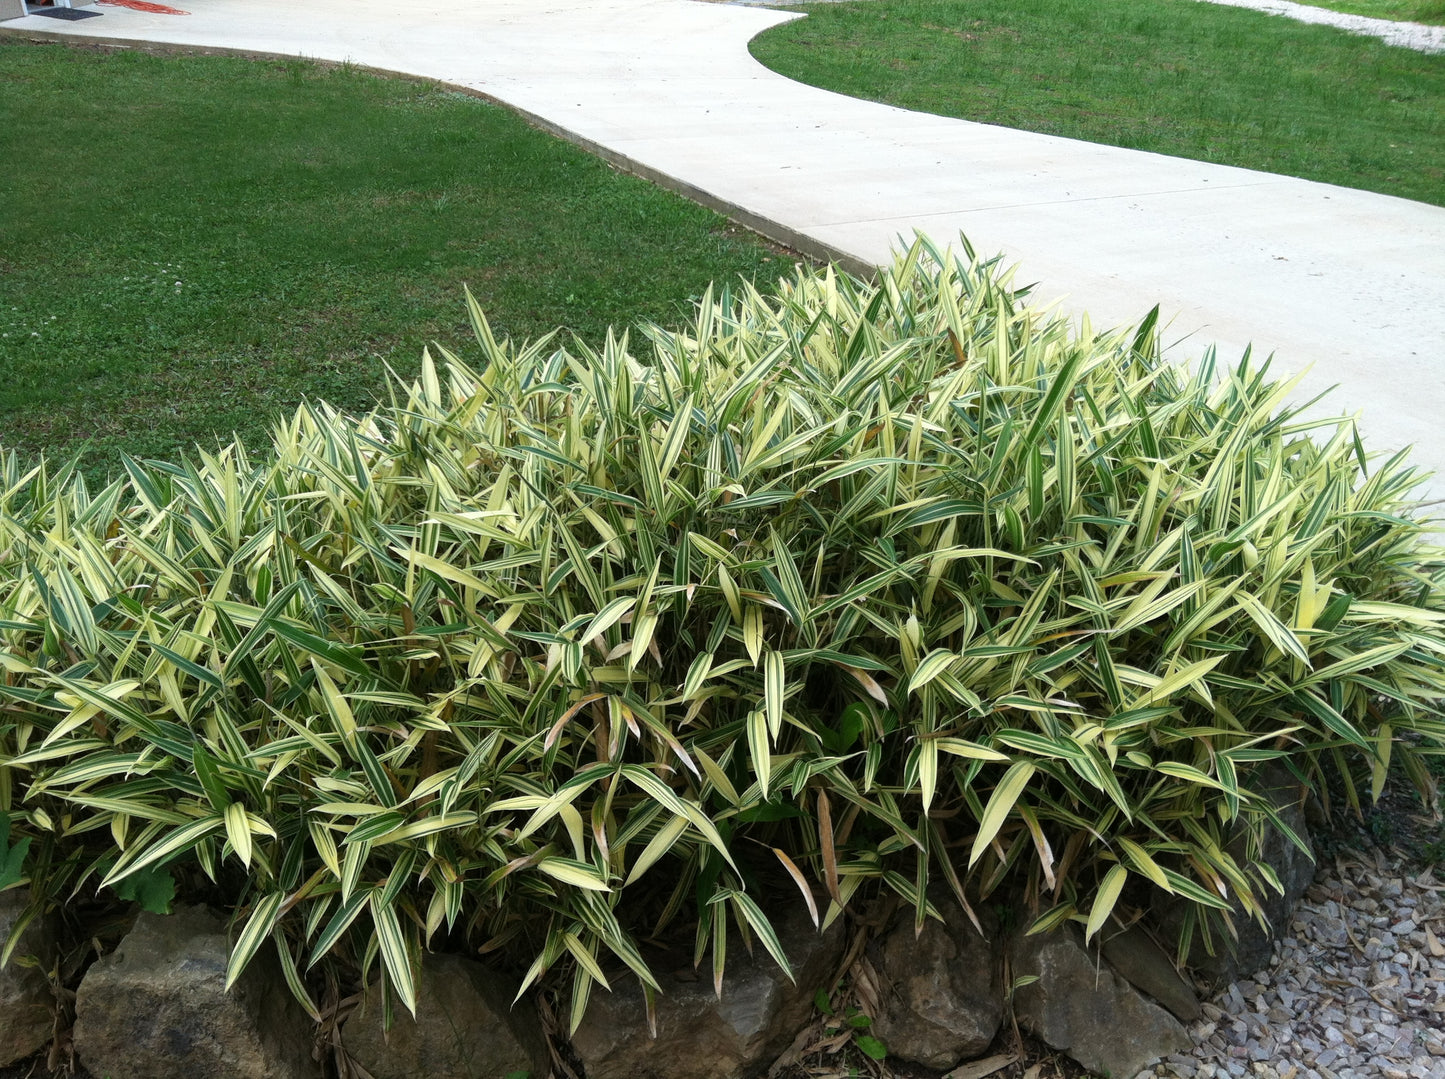 Short statue, shrub-like bamboo. Foliage is a vibrant green with light yellow variegation. Bamboo used for landscape in yard next to sidewalk